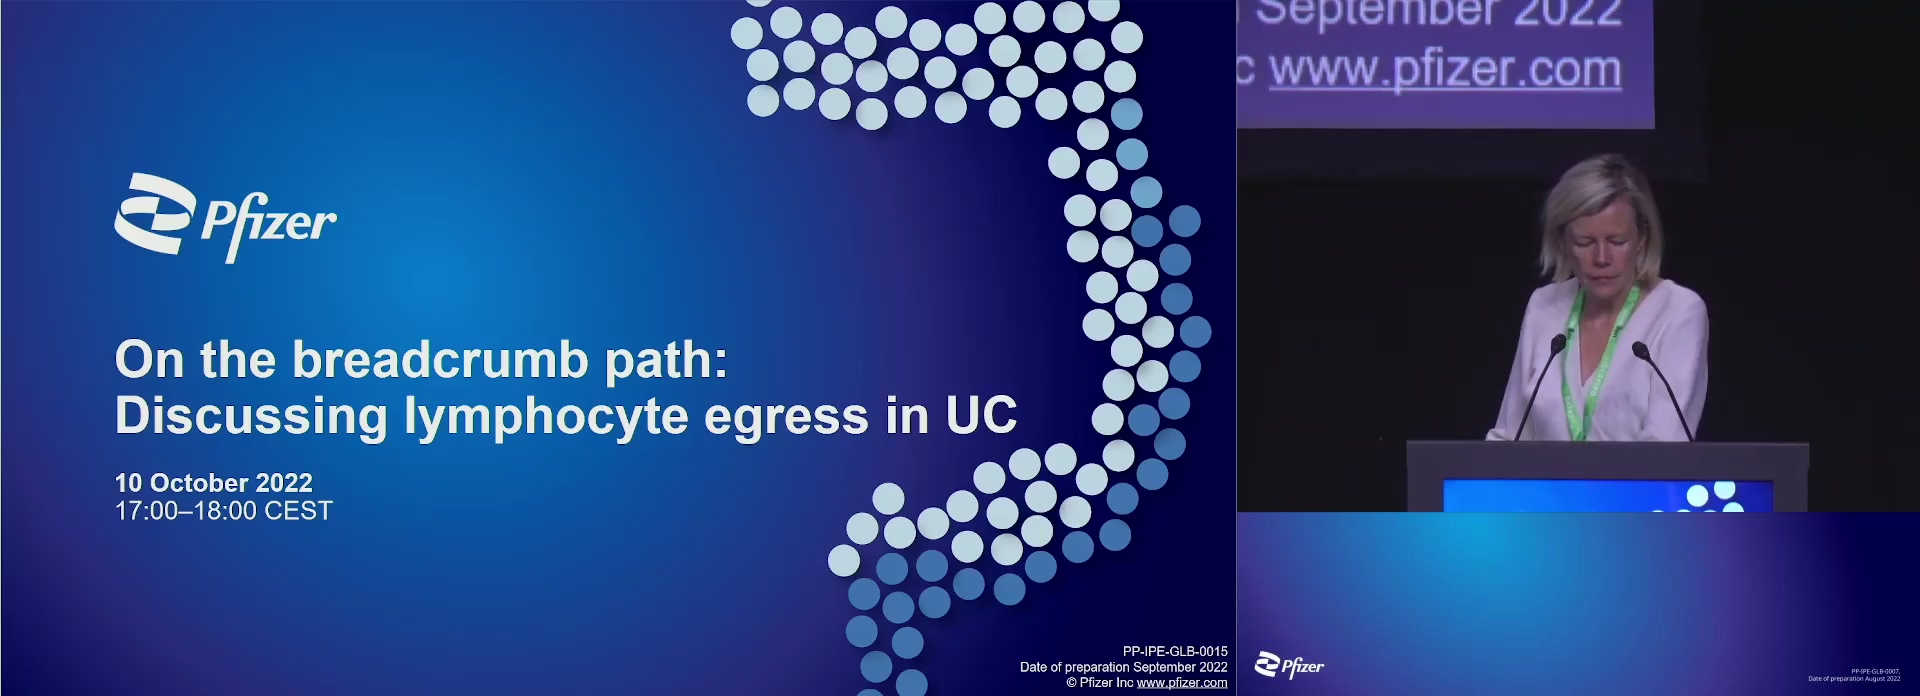 On the breadcrumb path – discussing lymphocyte egress in UC (Pfizer INC)